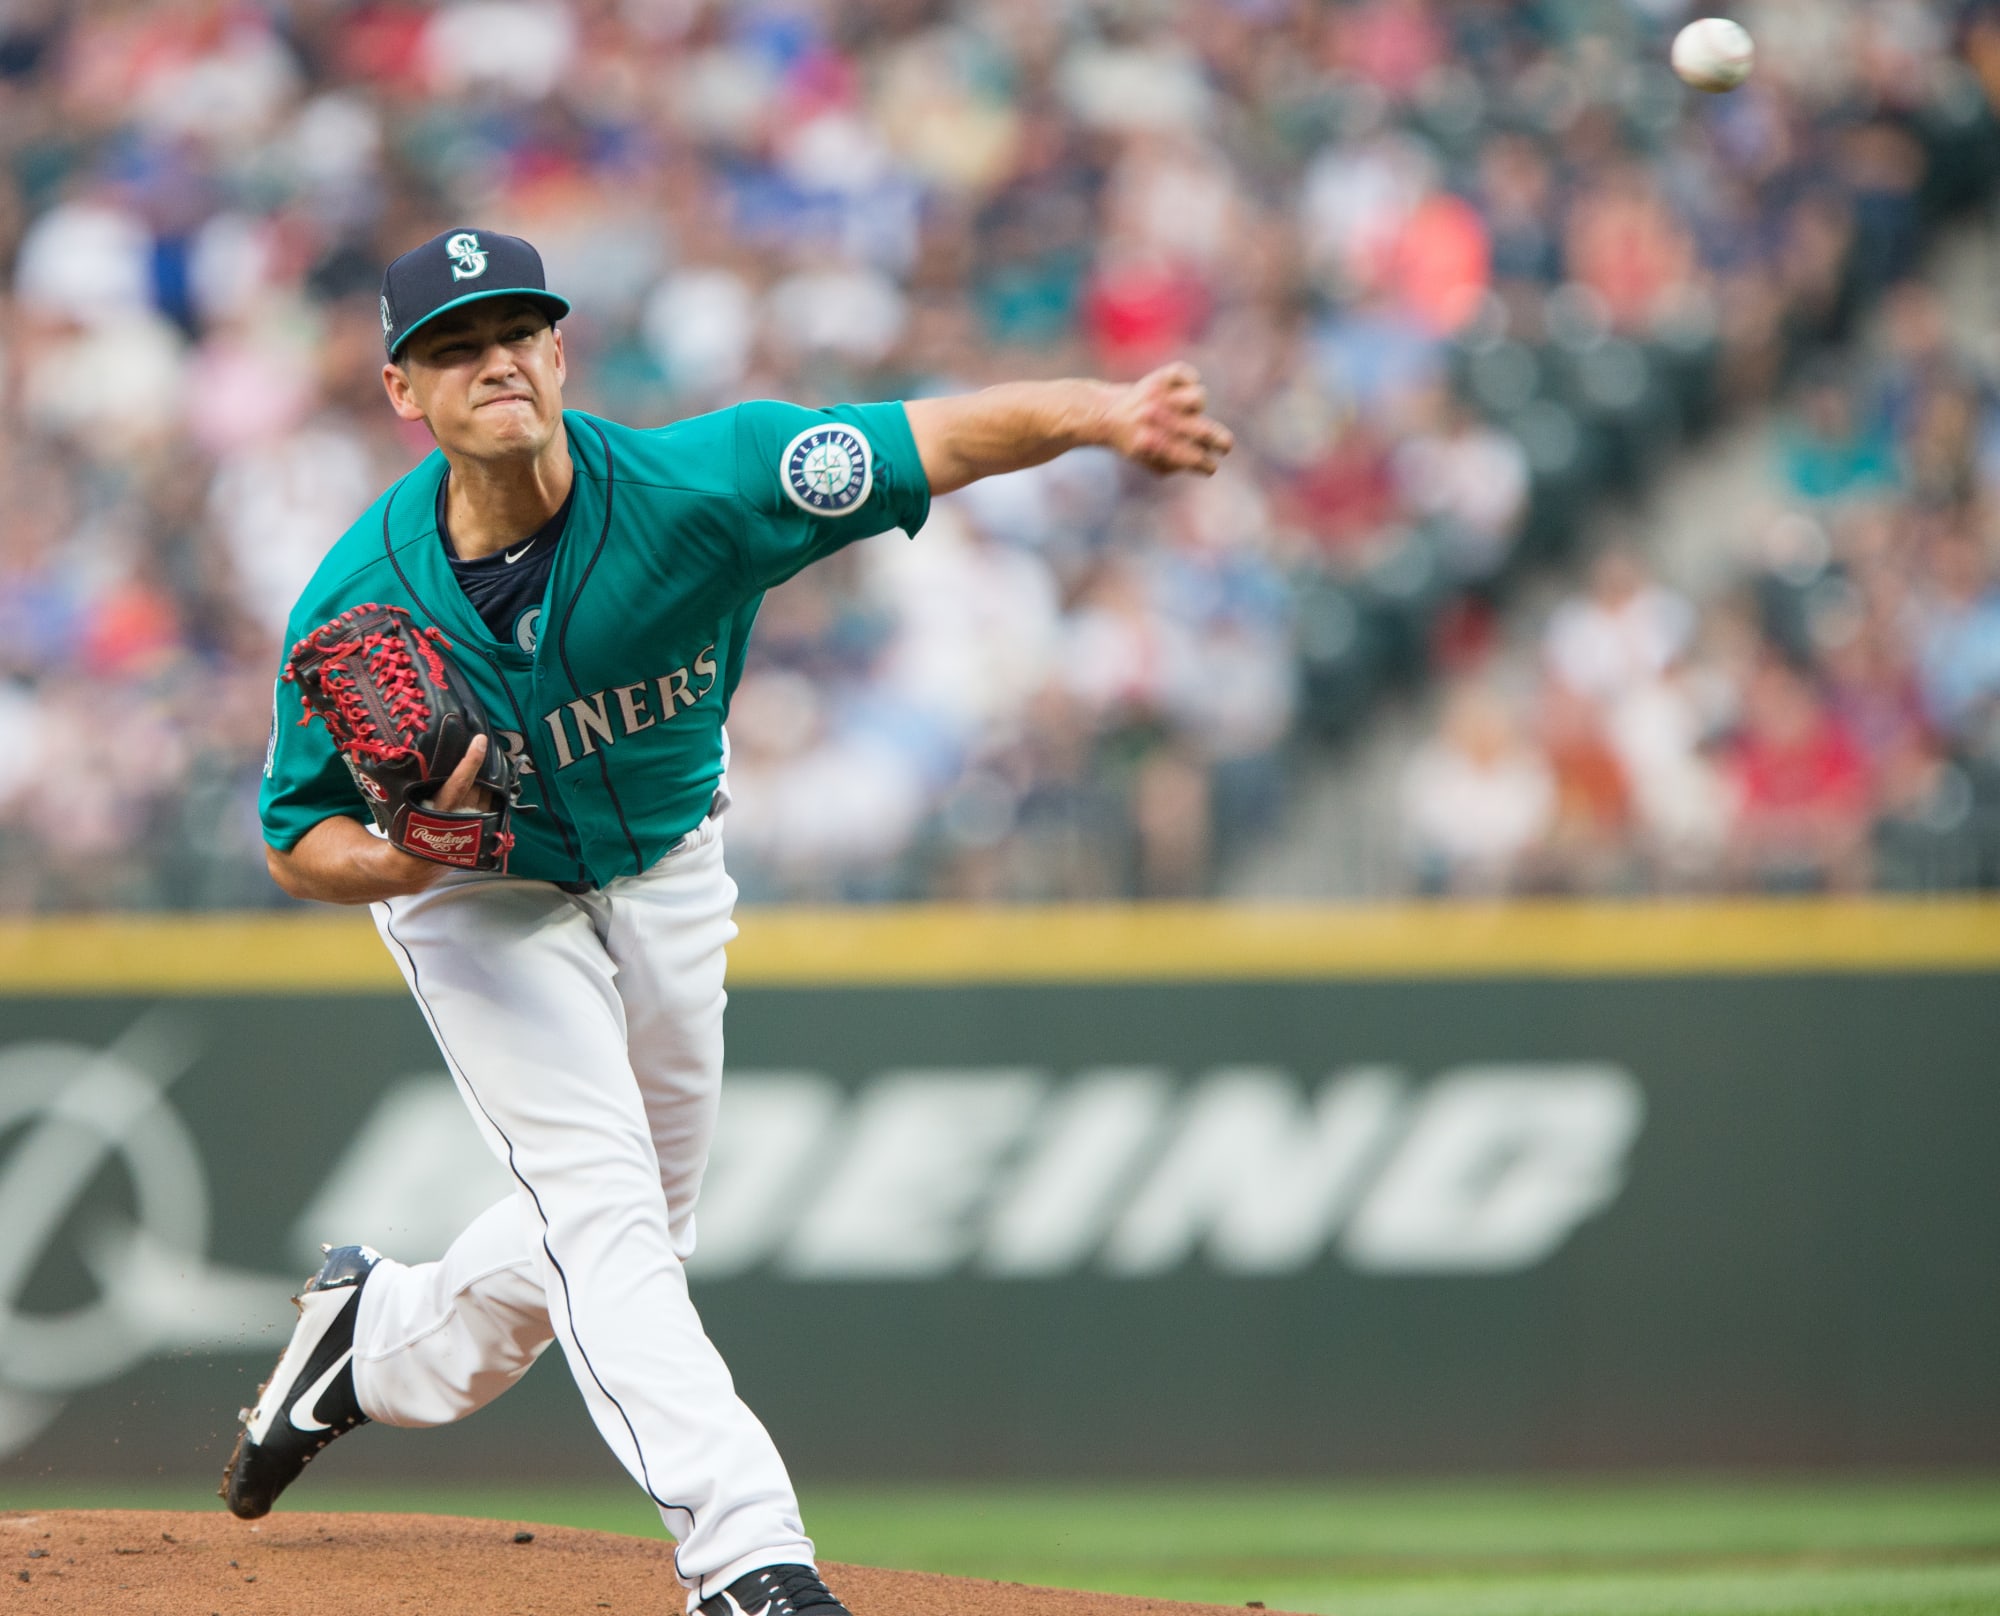 Marco Gonzales is Worthy of Becoming the Mariners' Ace